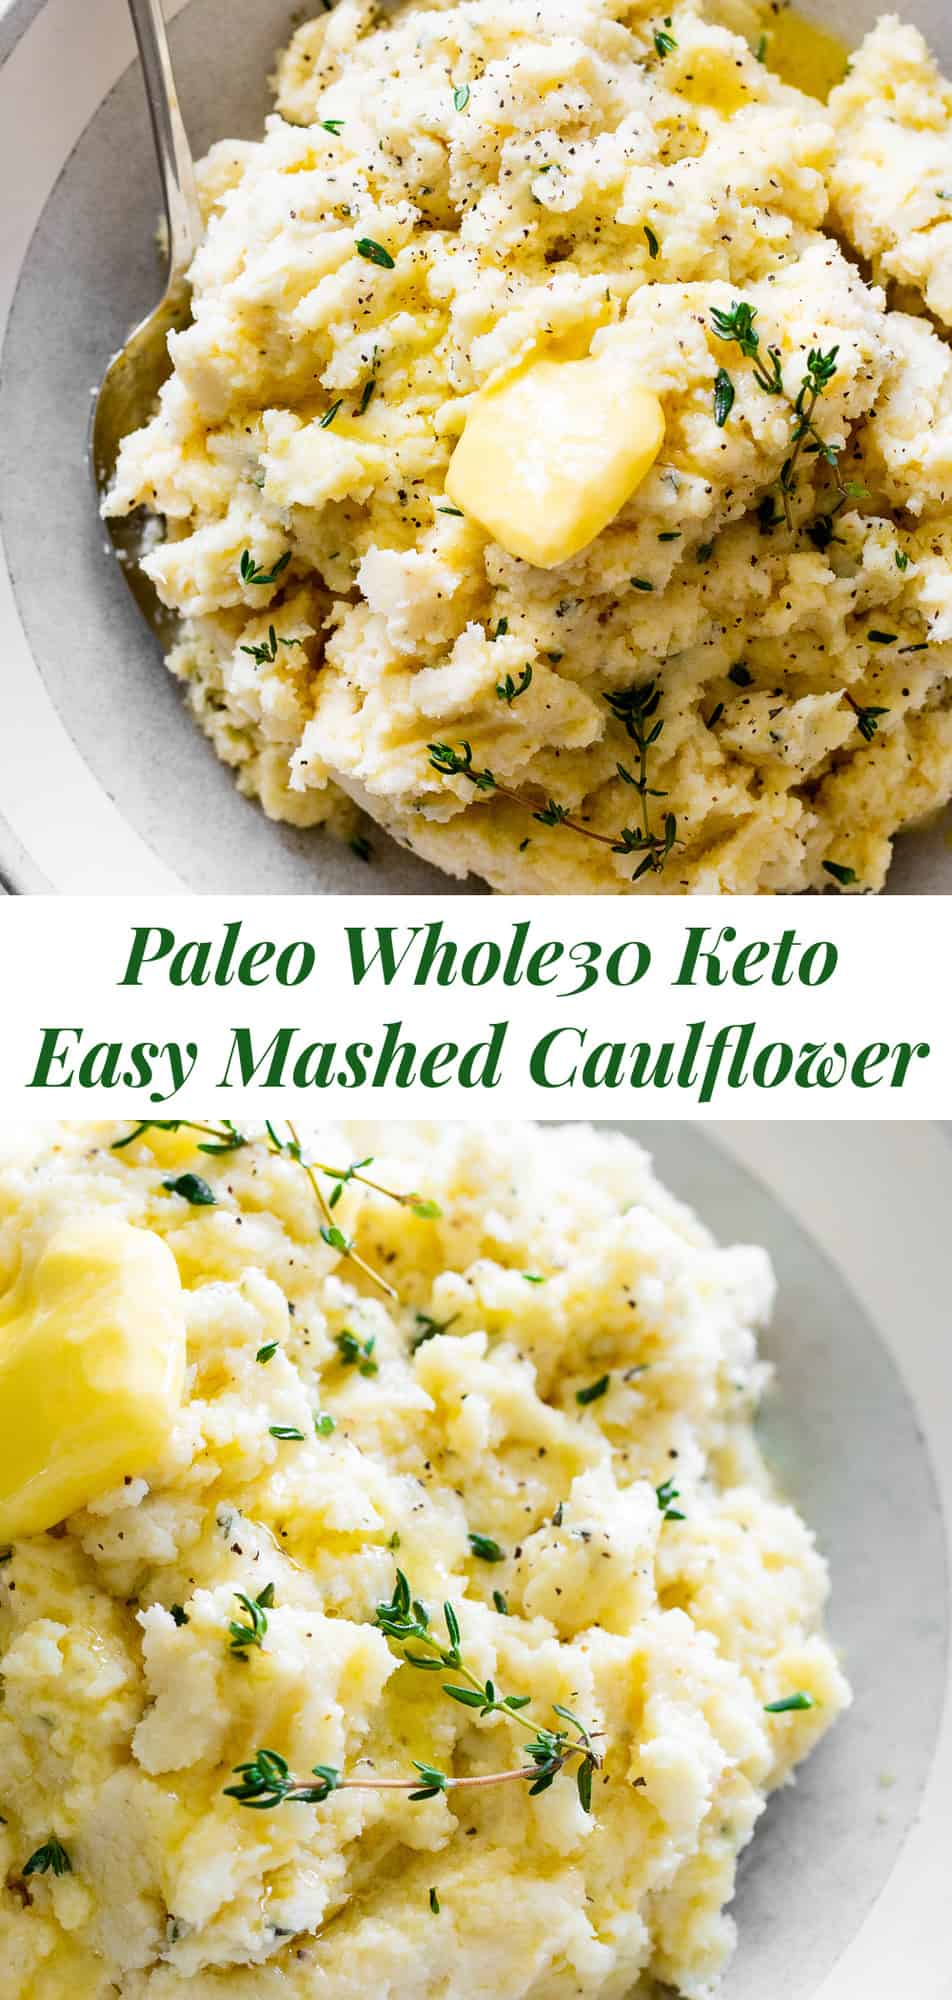 This is the simplest and most delicious recipe for mashed cauliflower (or cauliflower mashed potatoes!) Whether for a holiday dinner or anytime meal, this mashed cauliflower is super flavorful with savory garlic and fresh herbs, a side dish that will complement any main course and even steal the show! Paleo, Whole30, Keto and vegan option. #paleo #whole30 #keto #cleaneating 